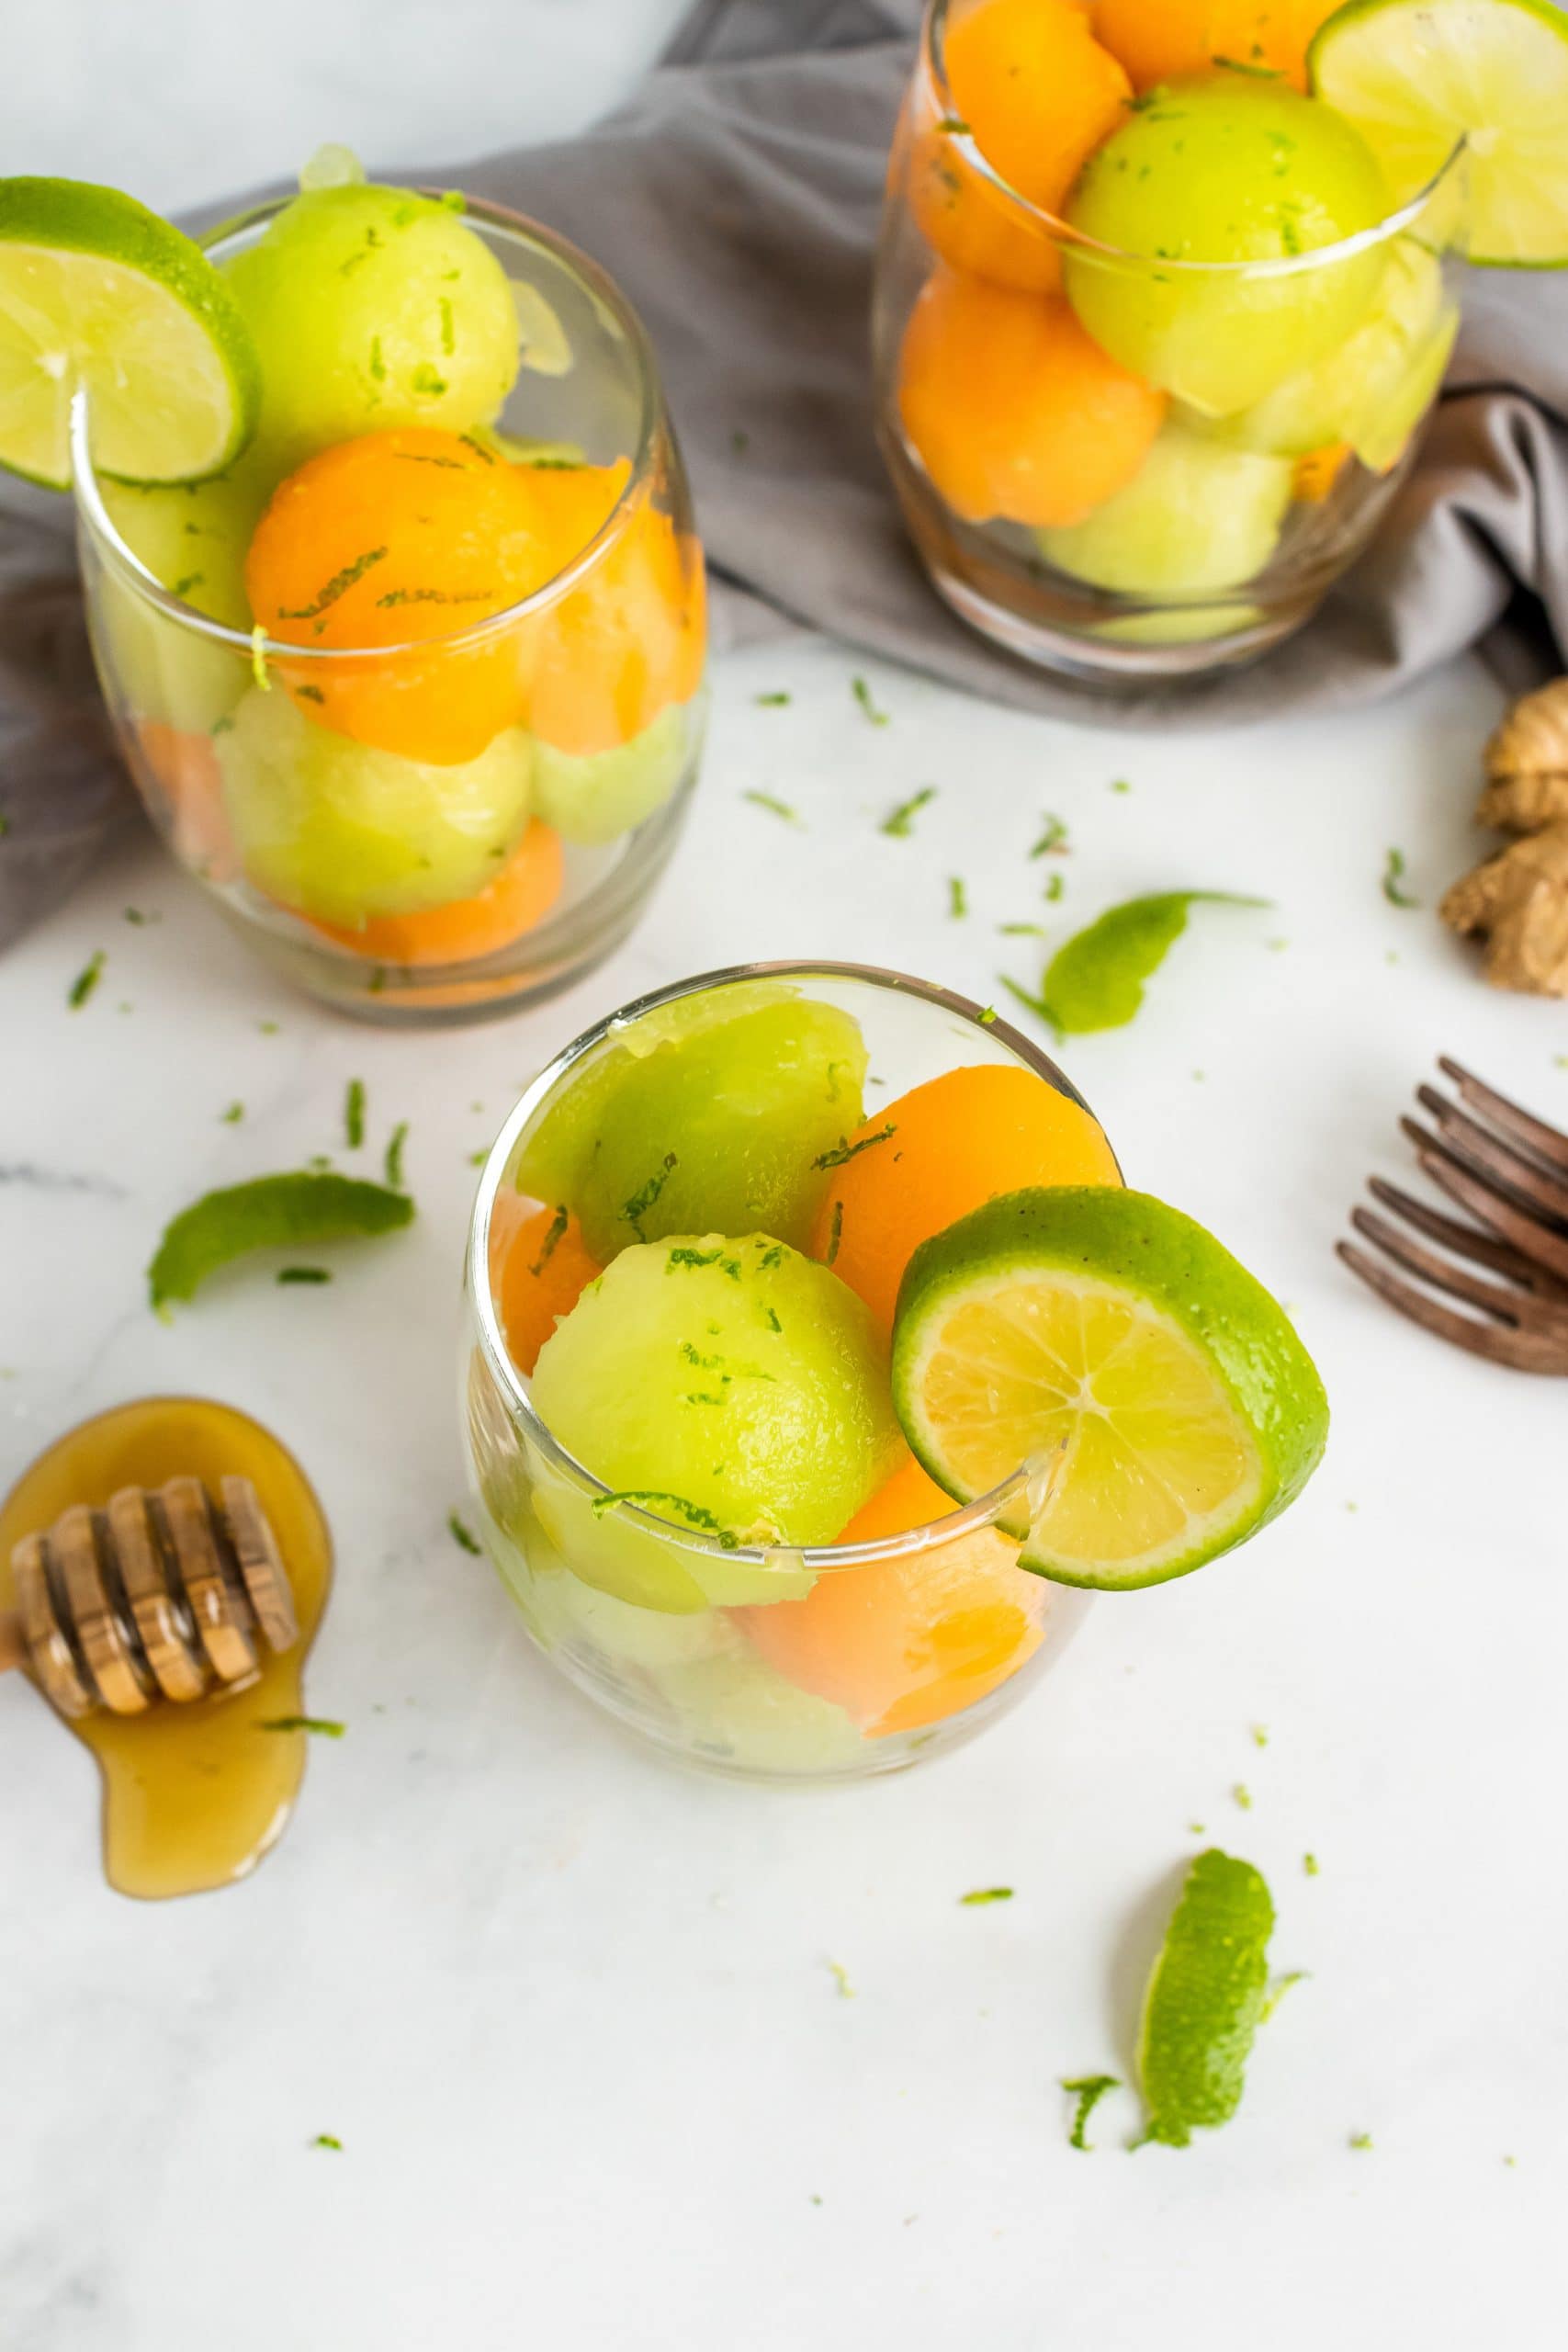 Cantaloupe, Mint and Lemon Infused Water Recipe: How to Make It